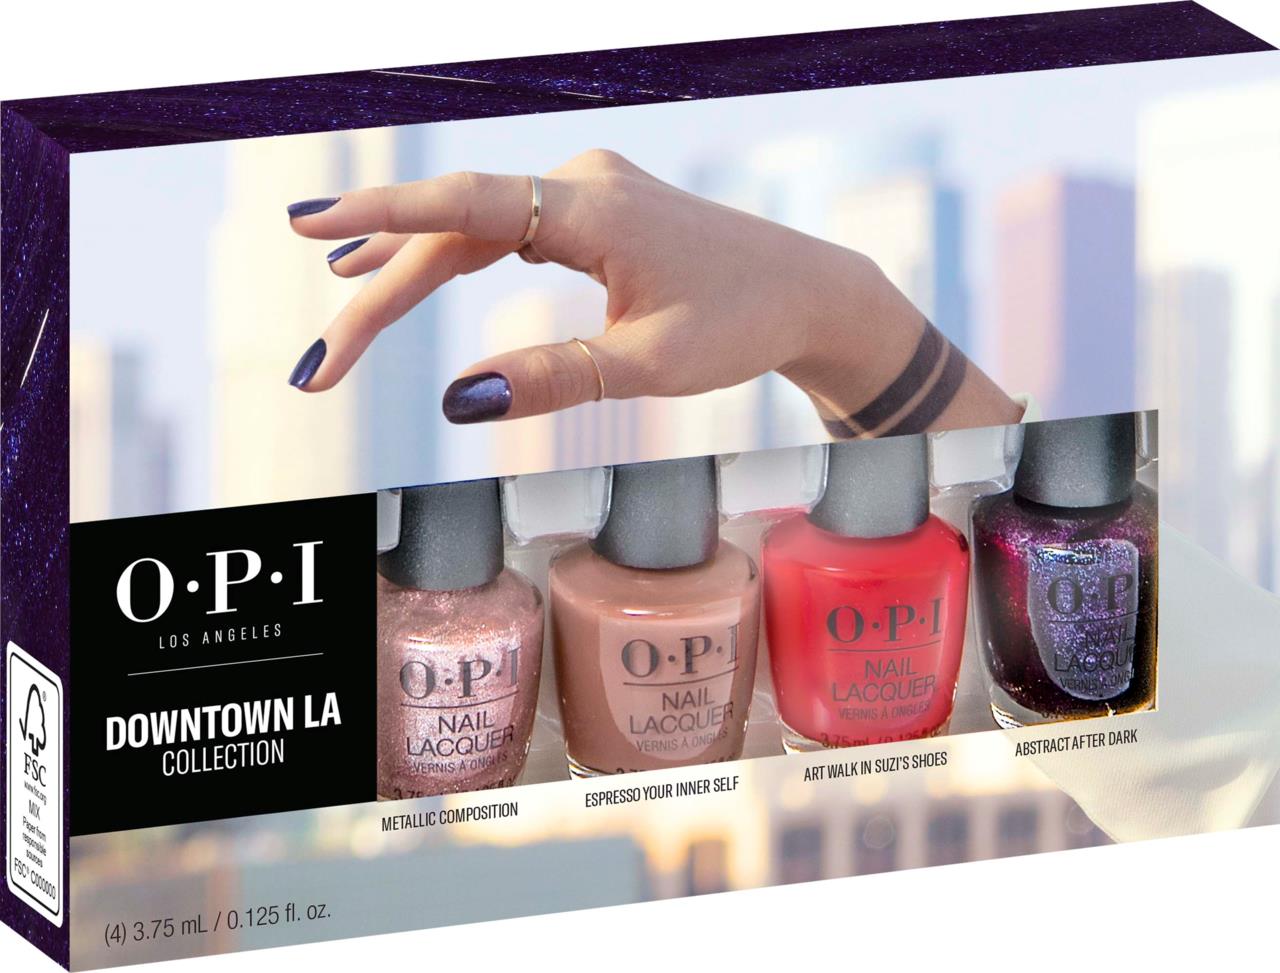 2. OPI Nail Lacquer, 185 Color - wide 7